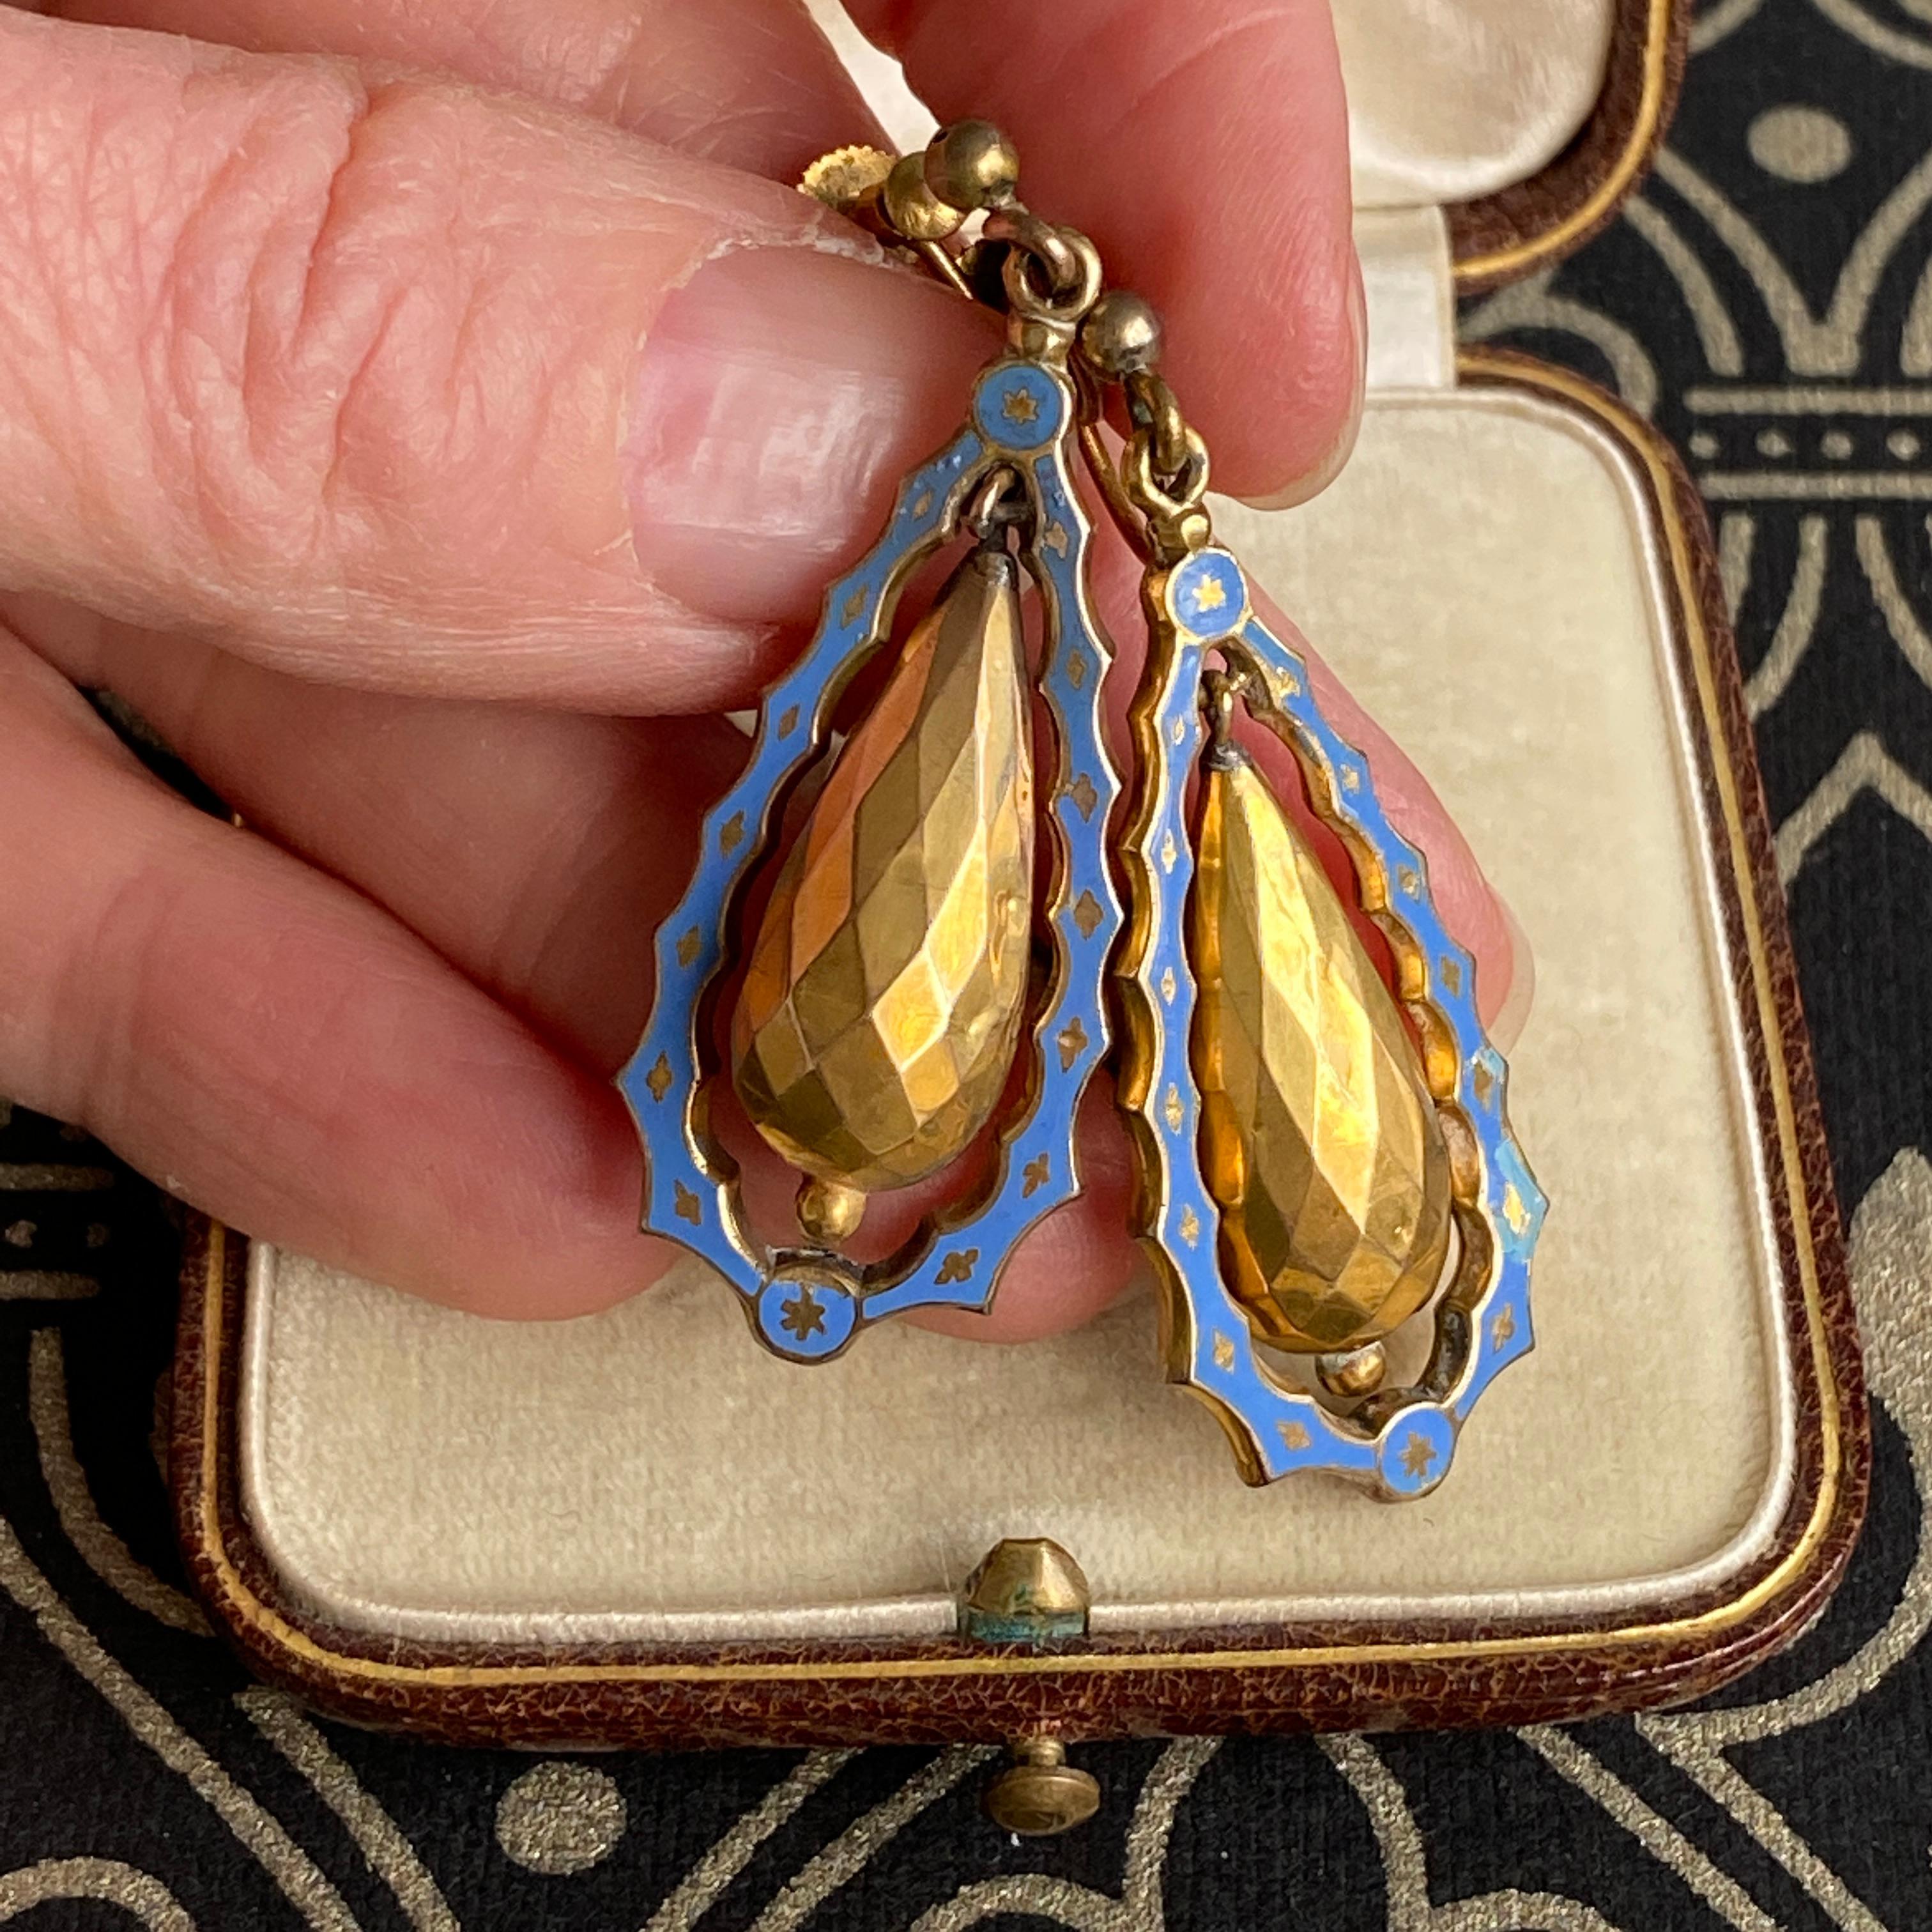 Details:
Classic blue enamel Victorian torpedo earrings set in 14K yellow gold. Fabulous faceted gold torpedo center, has movement and swings with an enamel surround. The details on these earrings are fun, and classic—a very timeless pair! These